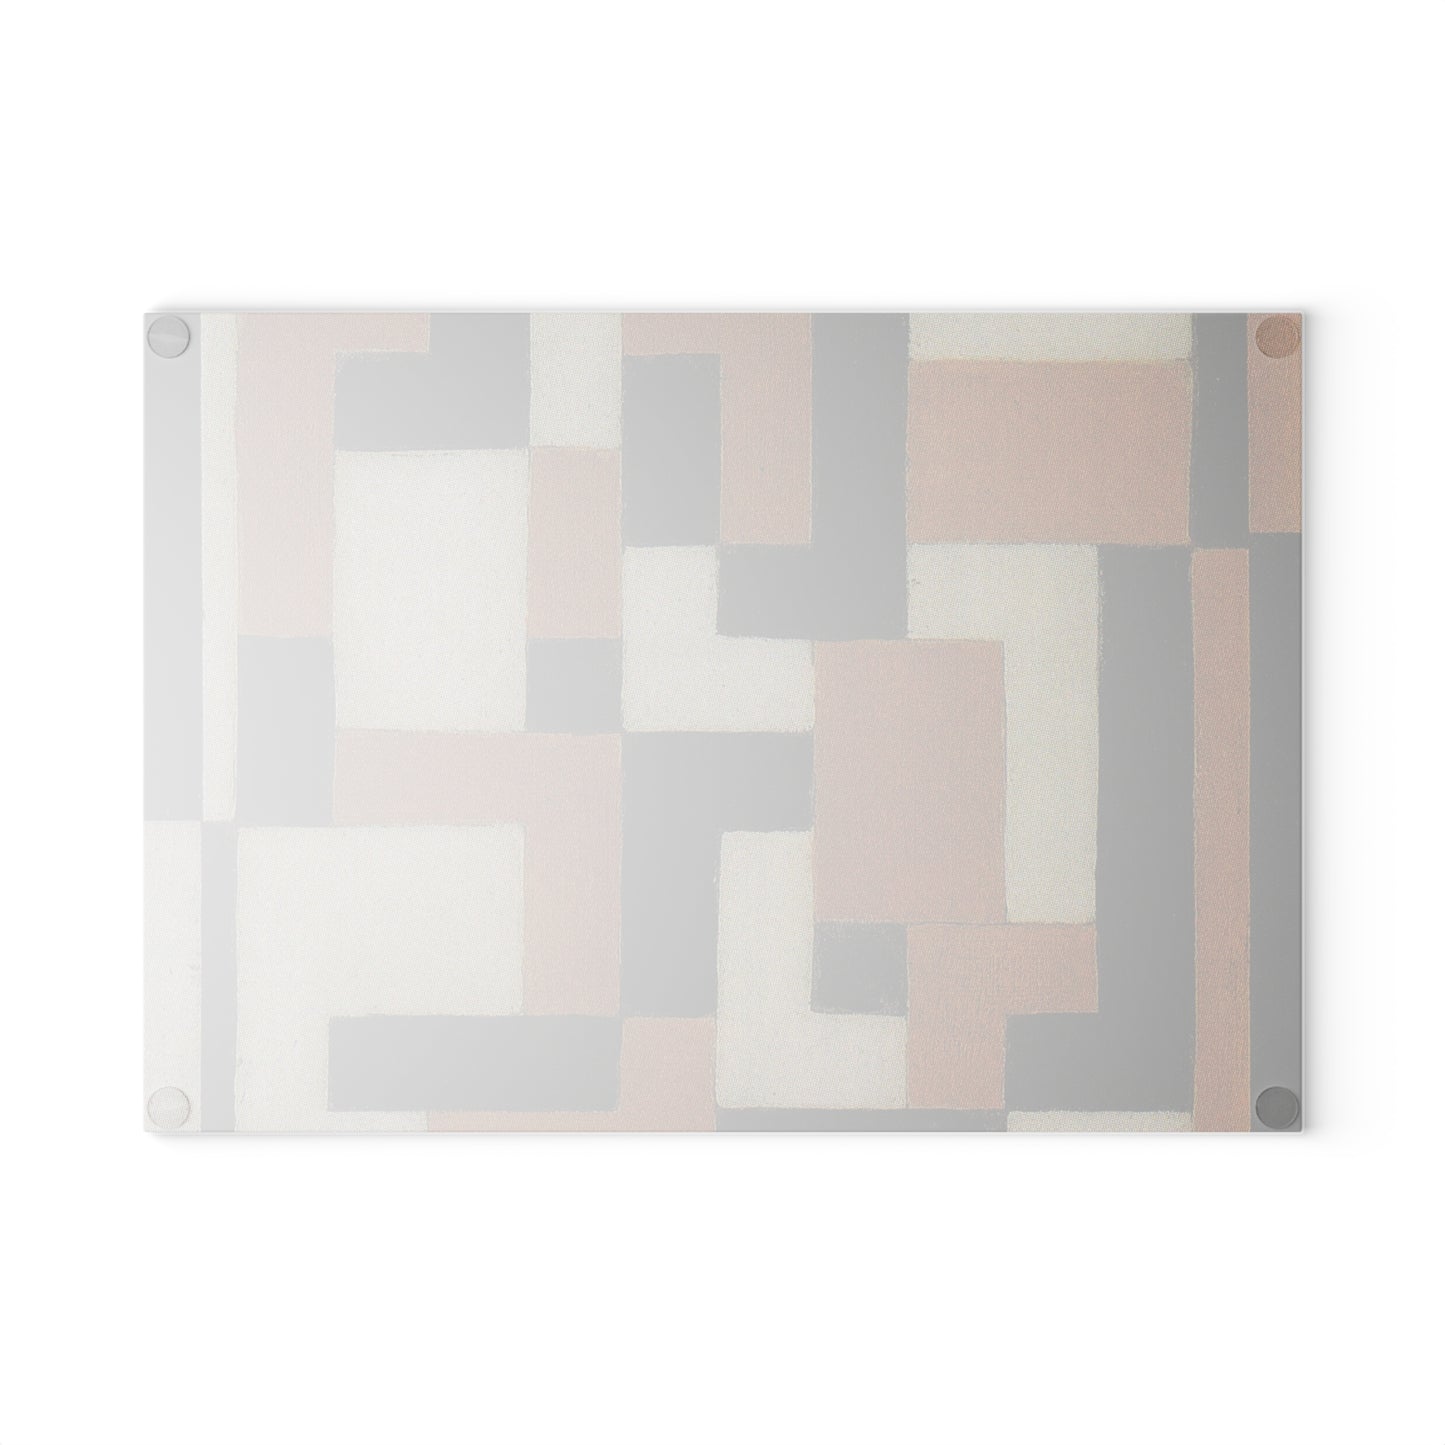 THEO VAN DOESBURG - COMPOSITION - ART GLASS CUTTING BOARD